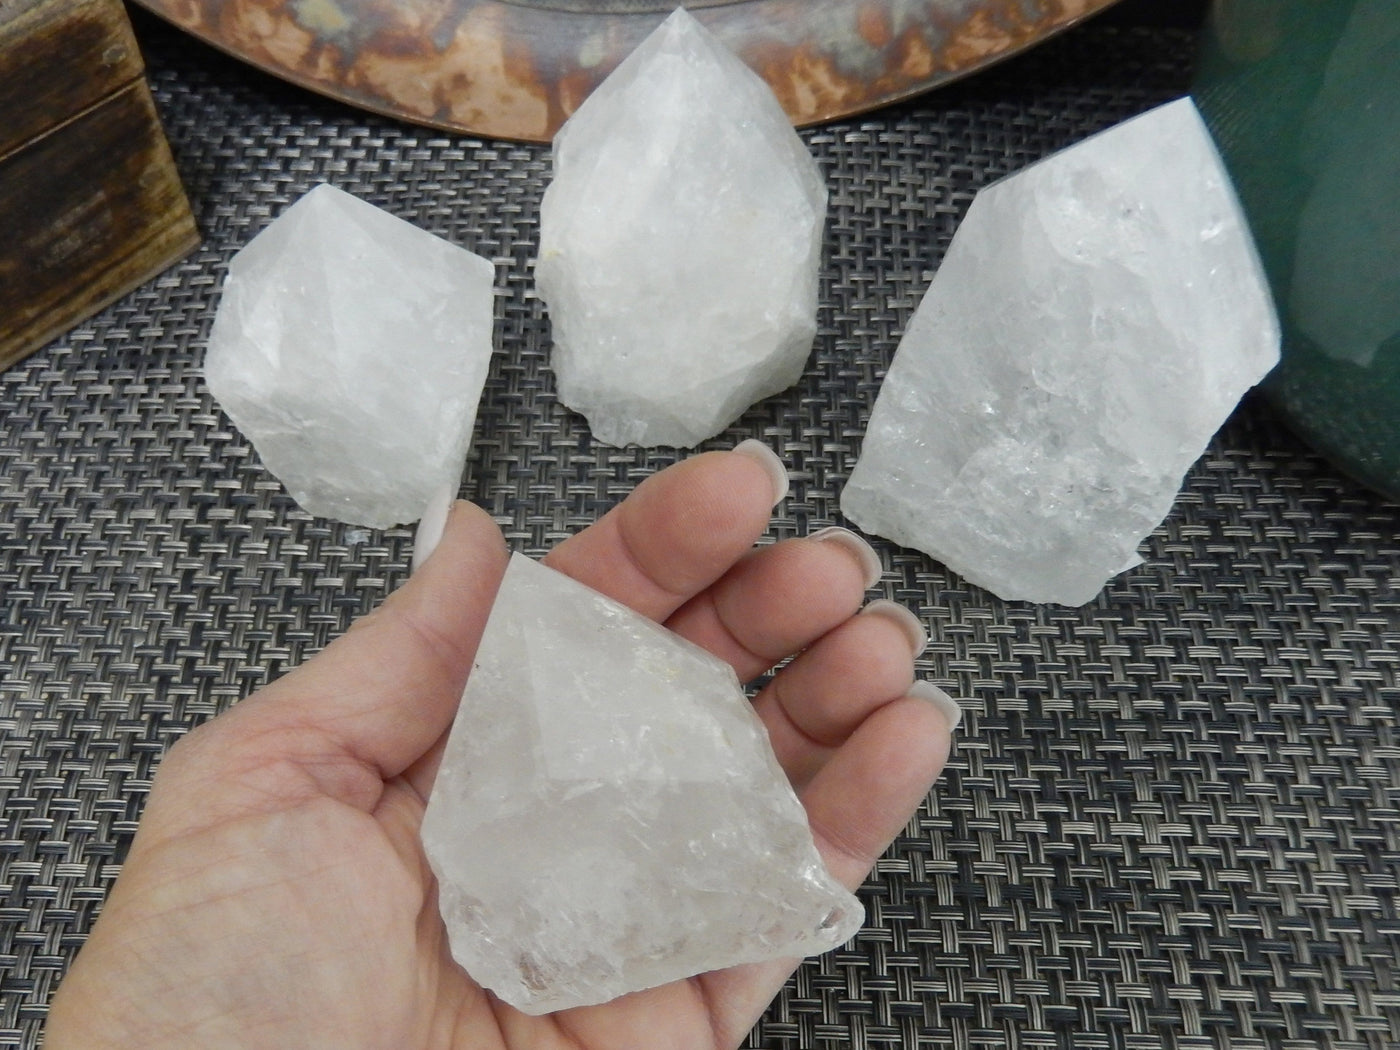 Crystal Quartz Semi Polished Points with size 100-200g  in a hand for size reference